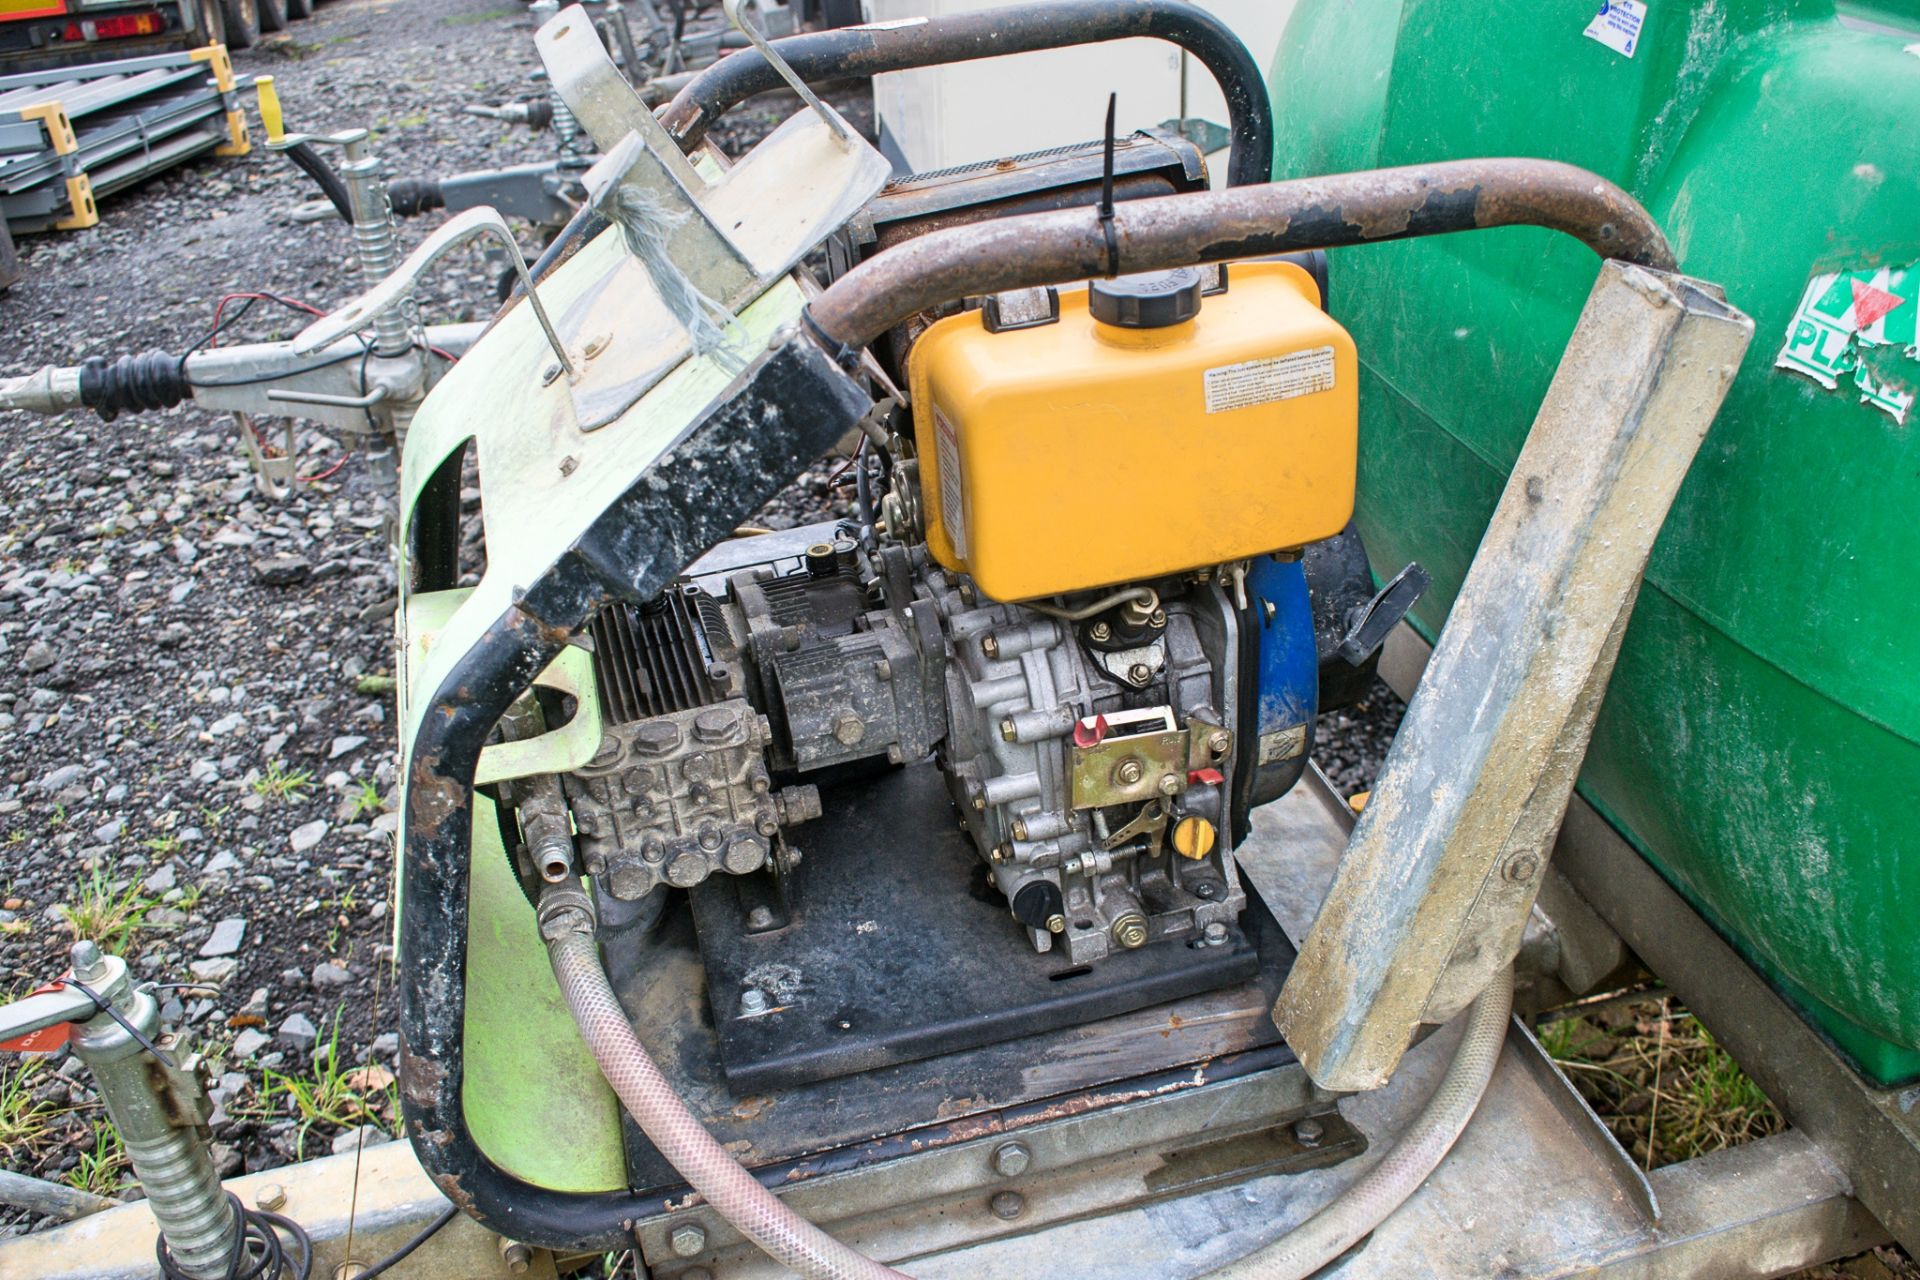 Trailer Engineering diesel driven fast tow pressure washer bowser A643140 - Image 3 of 3